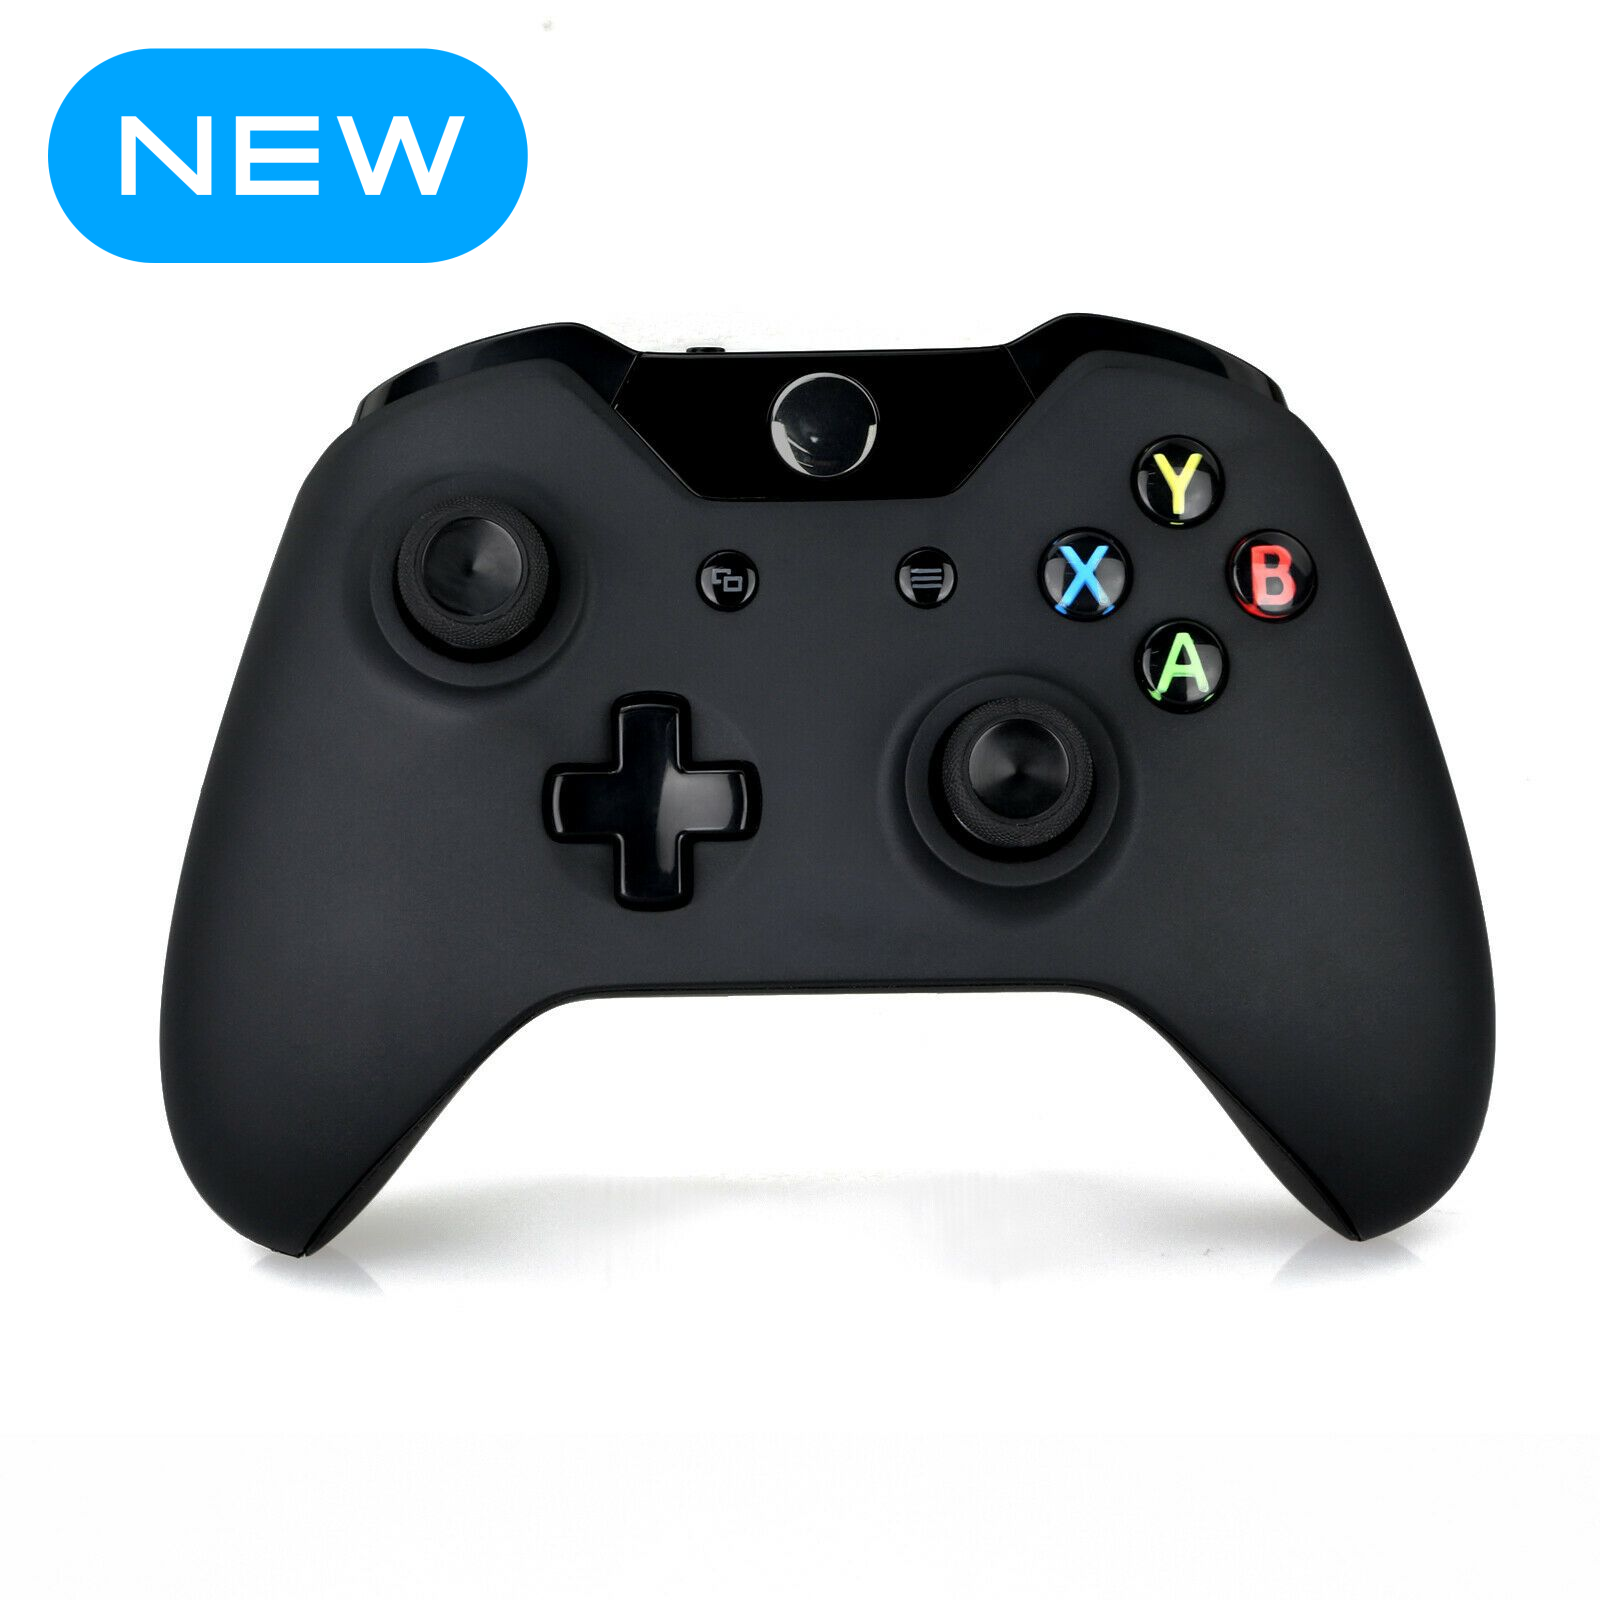 Compatible Windows PC Microsoft Xbox One Wireless Bluetooth Controller/USB Cable